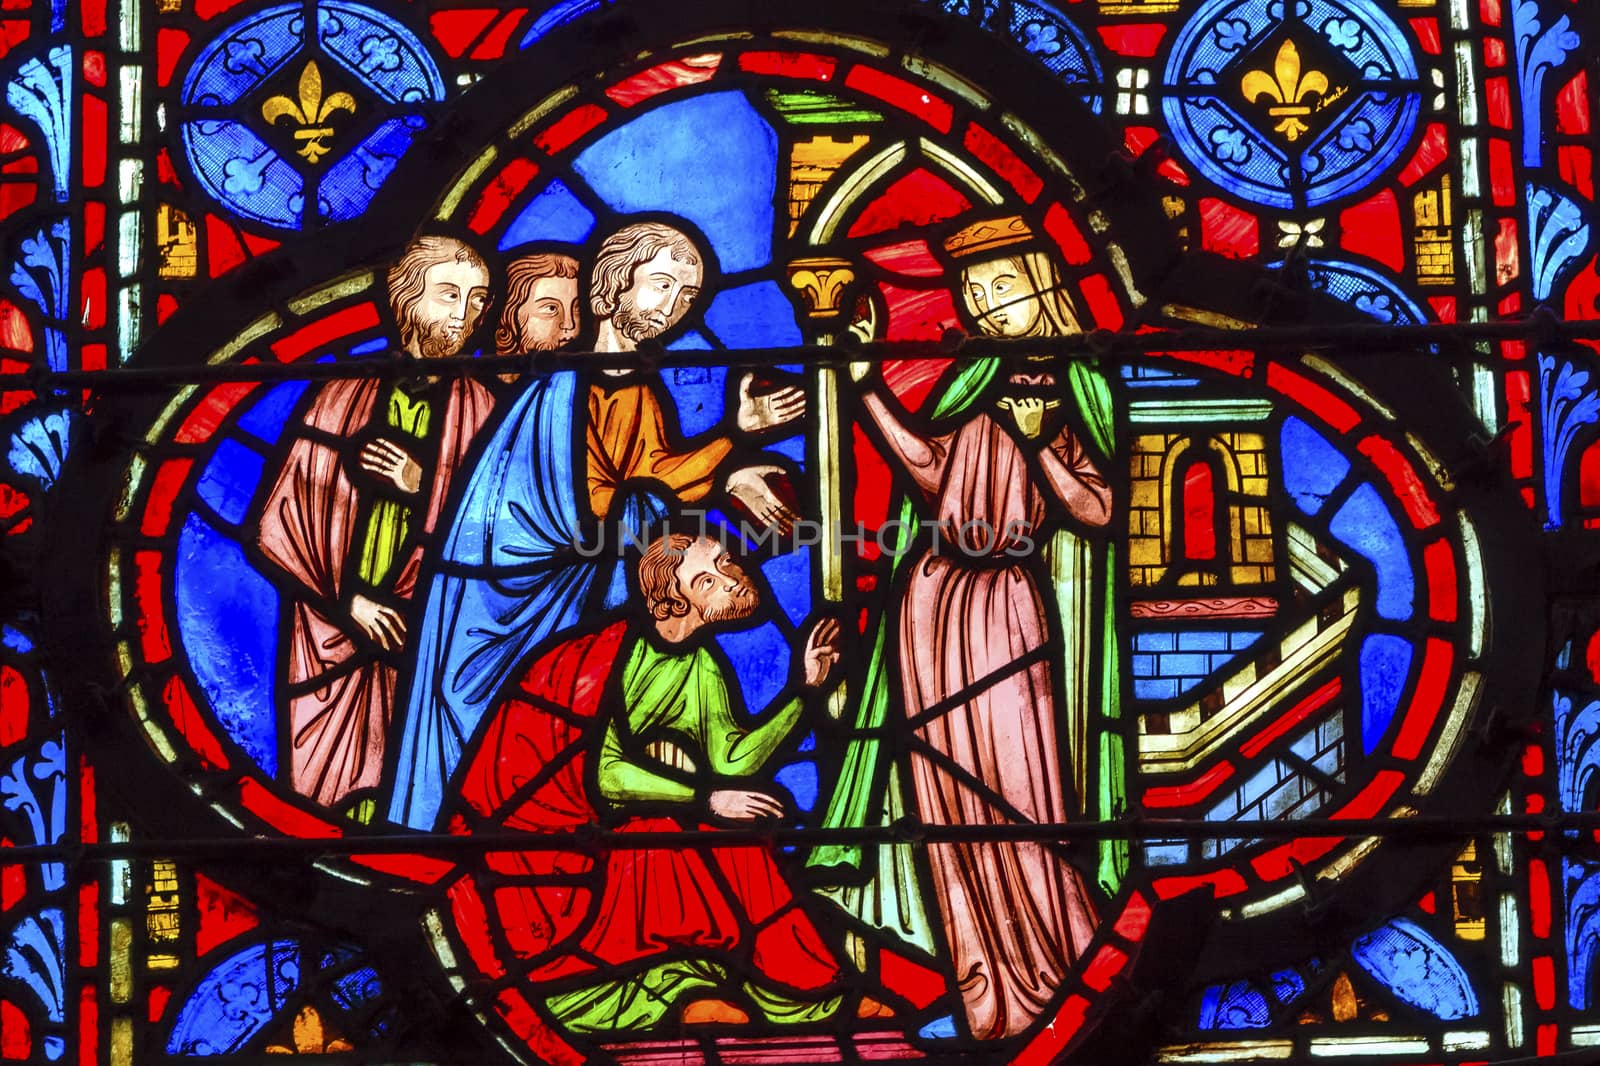 Queen With Followers Medieval Life Stained Glass Saint Chapelle Paris France.  Saint King Louis 9th created Sainte Chapelle in 1248 to house Christian relics, including Christ's Crown of Thorns.  Stained Glass created in the 13th Century and shows various biblical stories along with stories from 1200s.